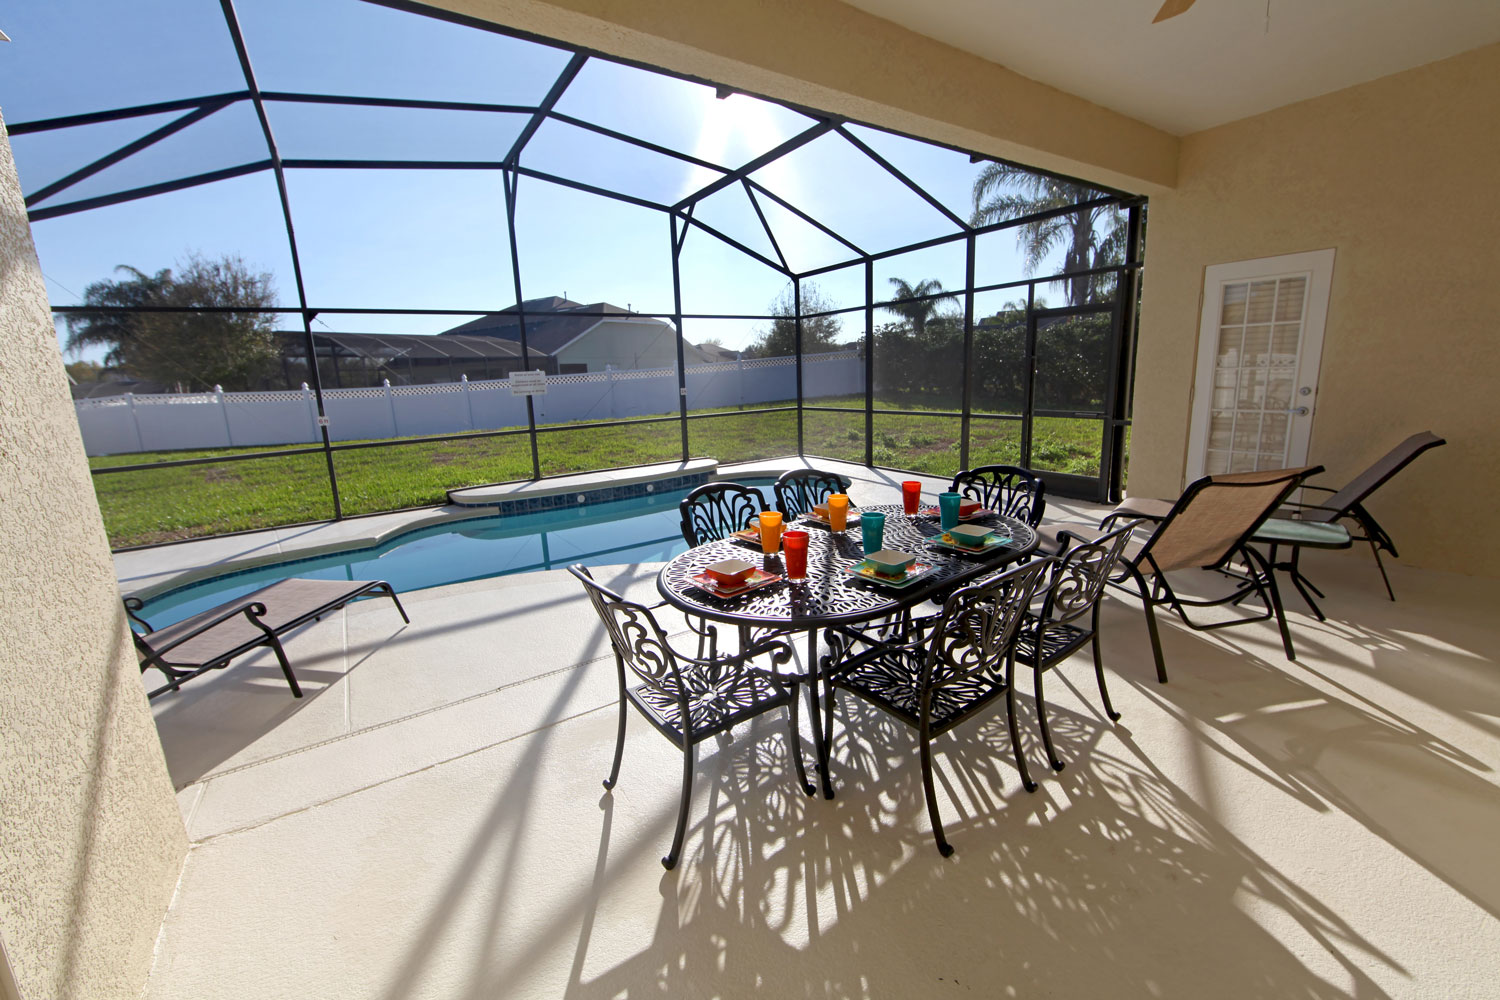 A huge stucco walled lanai with metal dining chairs and a small pool near the window, 21 Great Screened Lanai Ideas